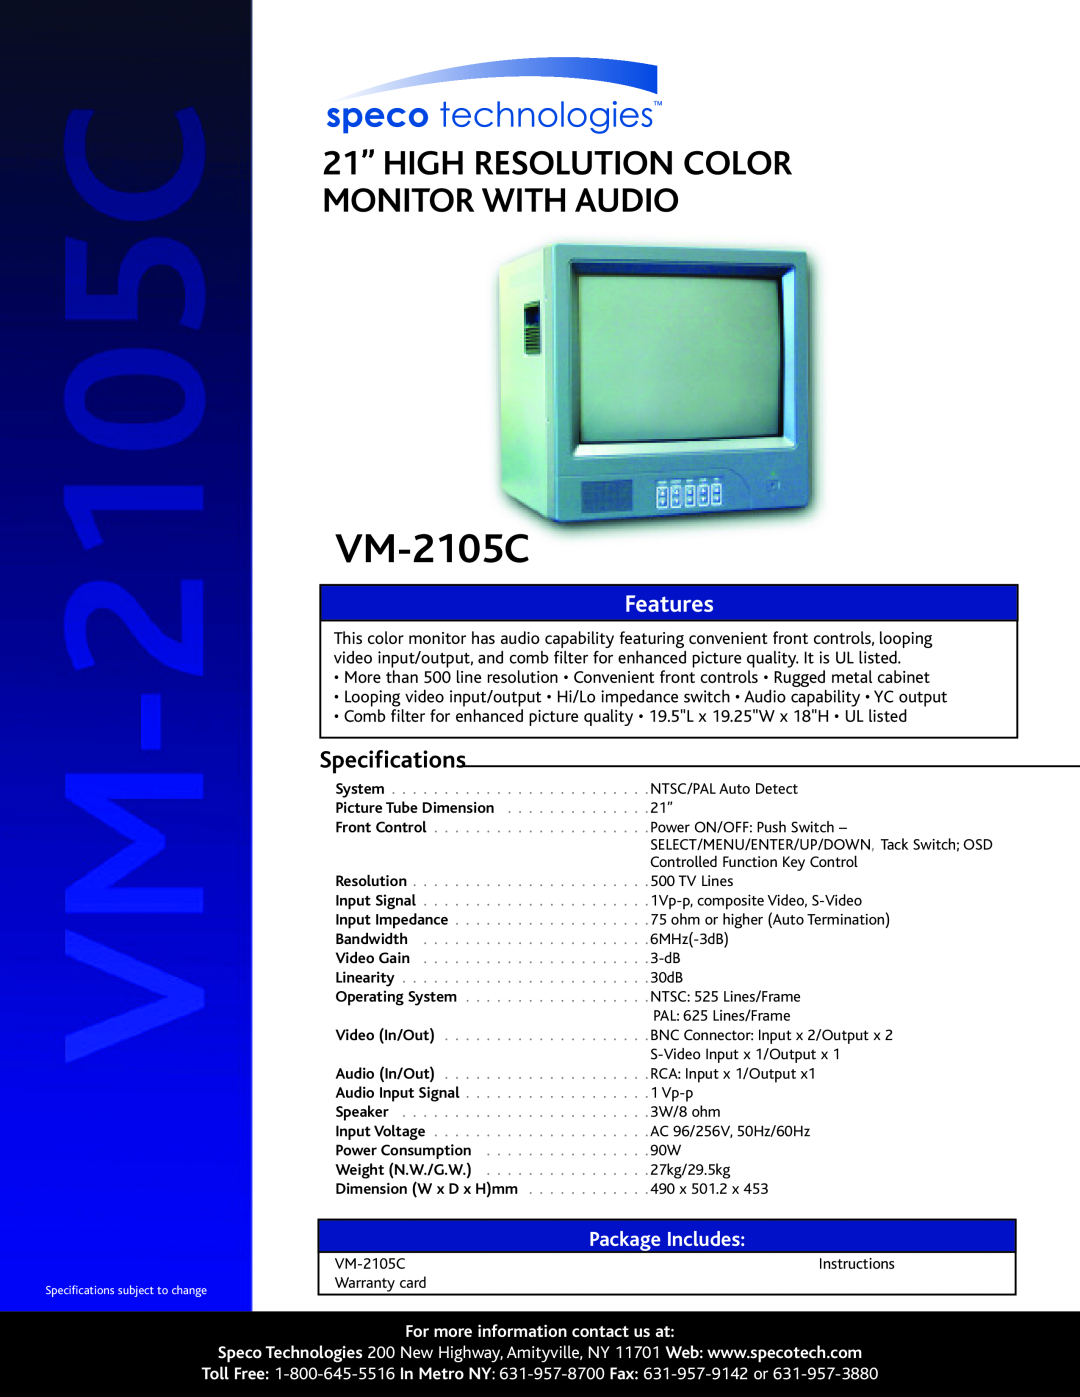 Speco Technologies VM-2105C specifications 21” HIGH RESOLUTION COLOR MONITOR WITH AUDIO, Features, Specifications 